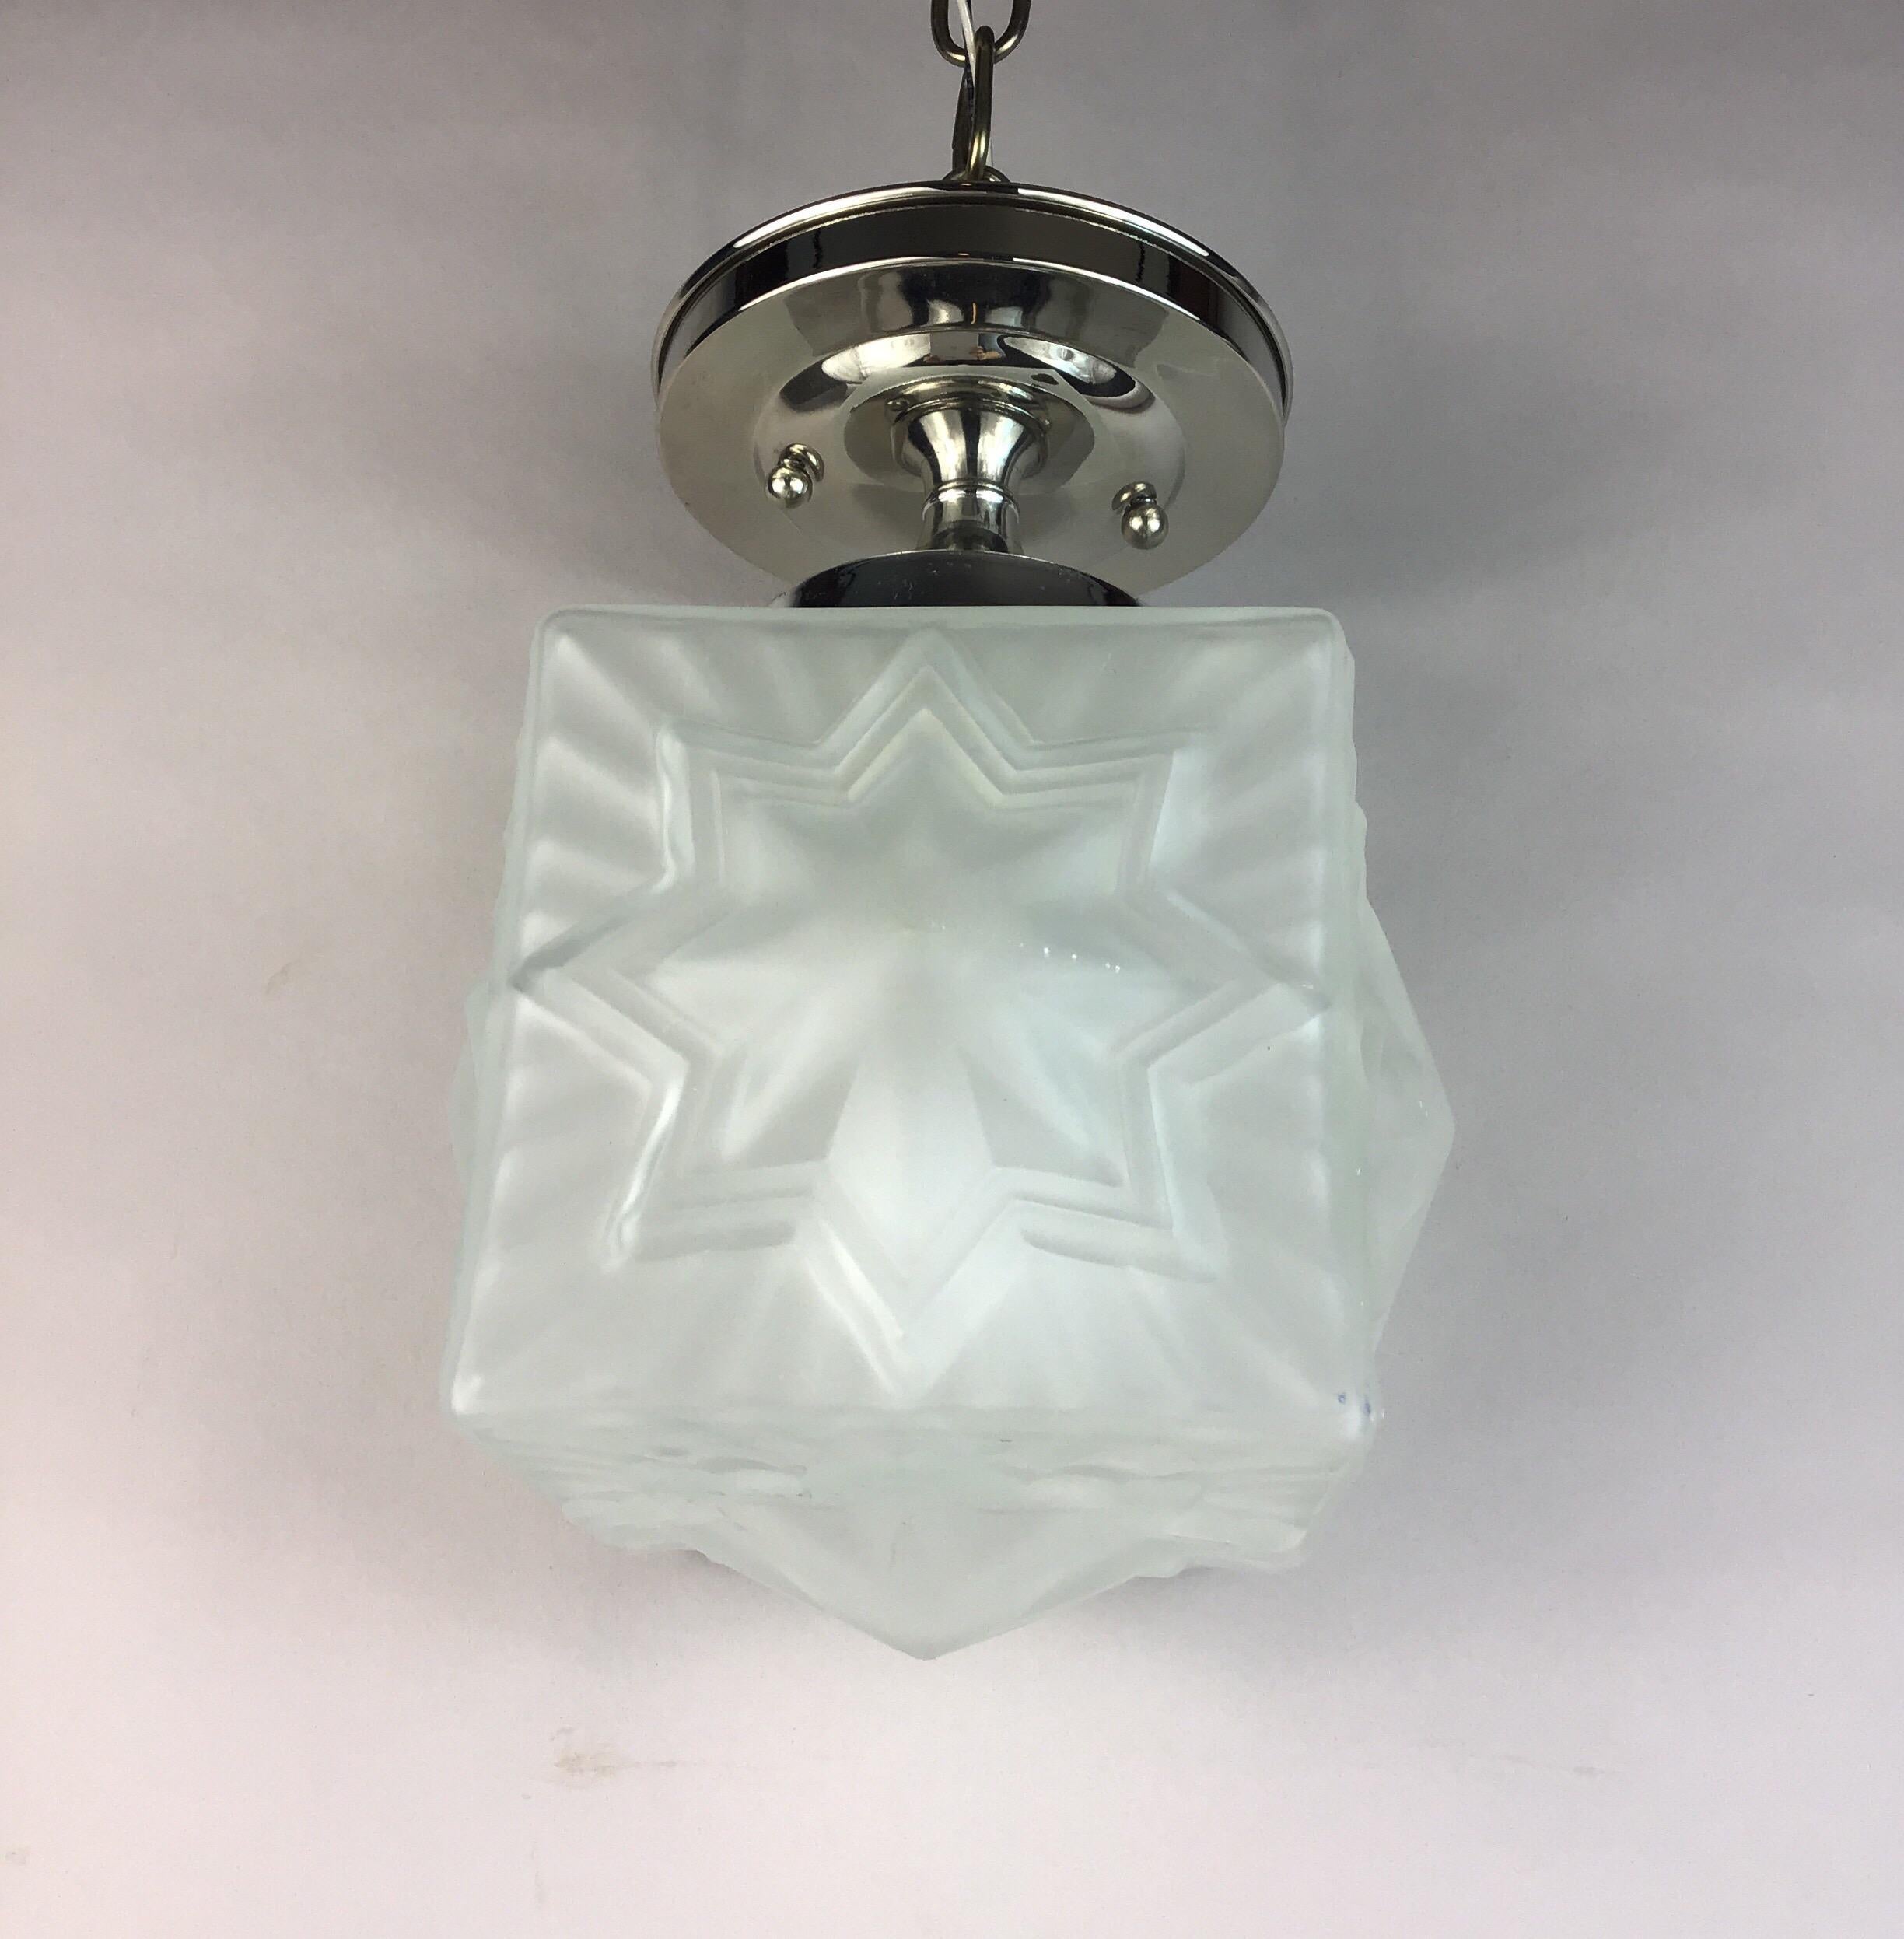 1-3059abc Frosted French star flushmount.
Takes one 100 watt Edison based bulb
3 available.Priced individually